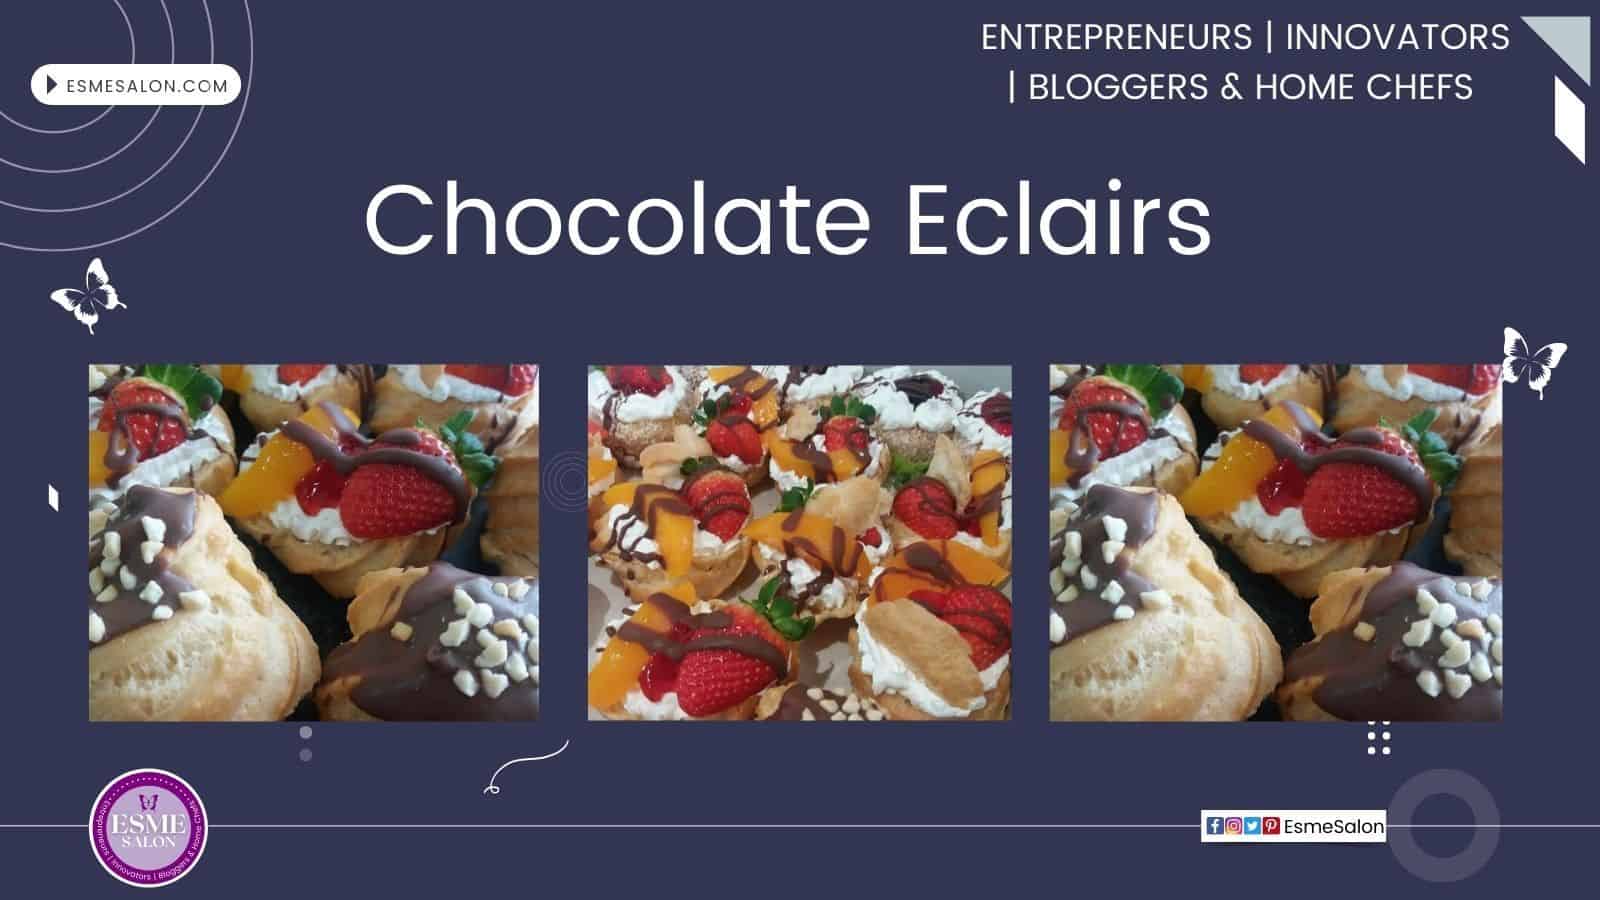 An image of a platter filled with Delicious Chocolate Eclairs and topped with nuts and strawberries